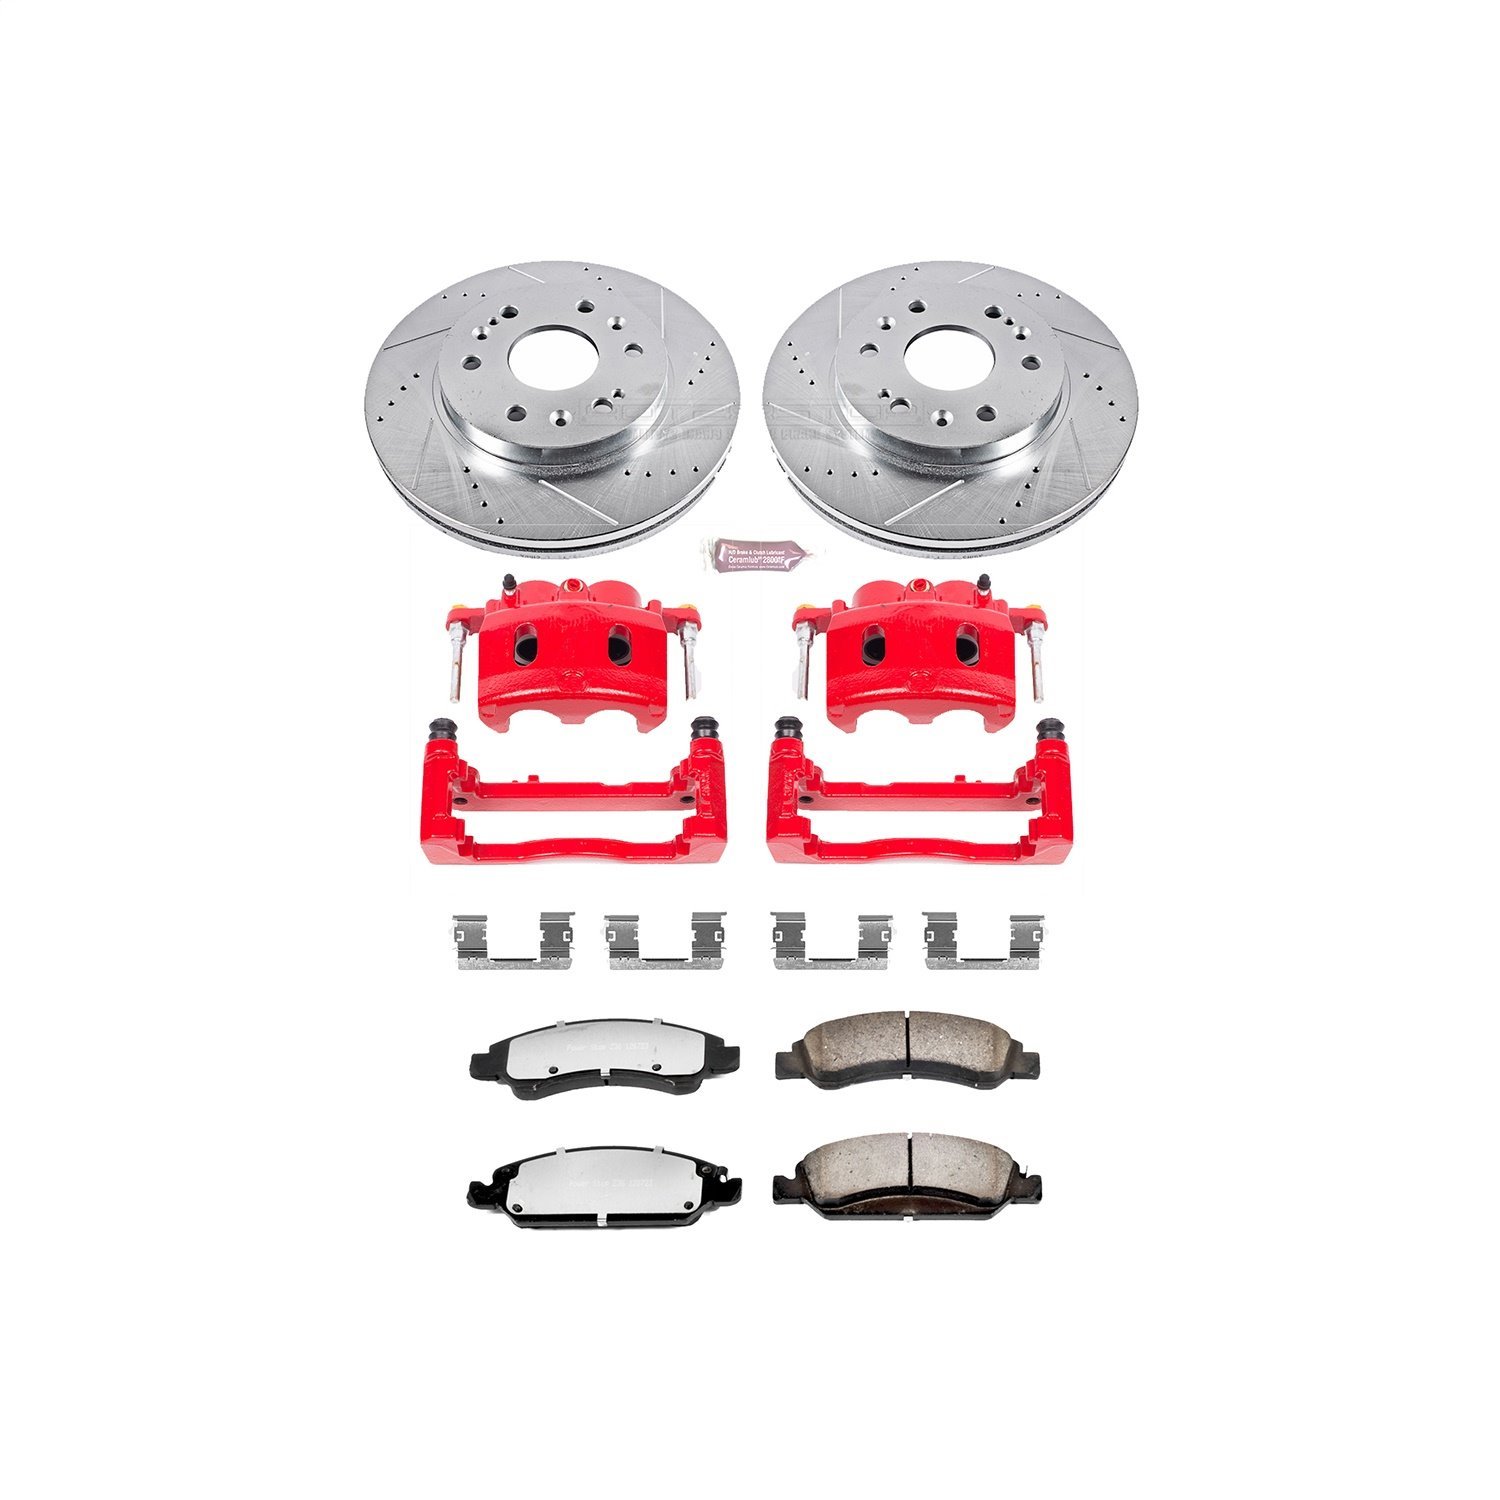 Truck and Tow Z36 Front Brake Pad, Rotor and Caliper Kit